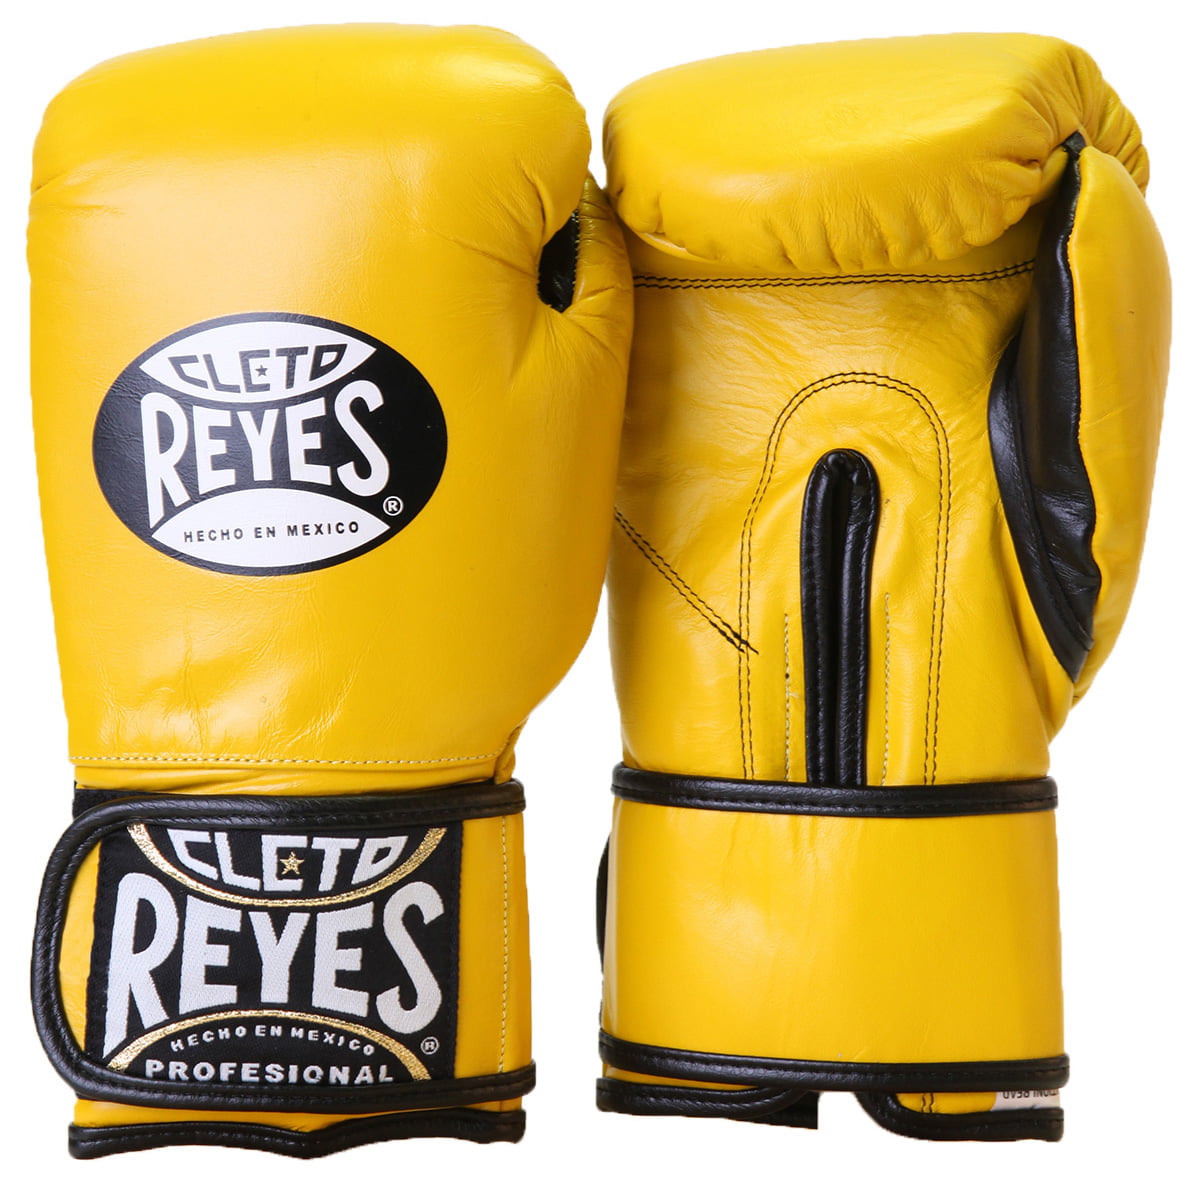 Citrus Green Cleto Reyes Hook And Loop Leather Training Boxing Gloves 16 Oz 